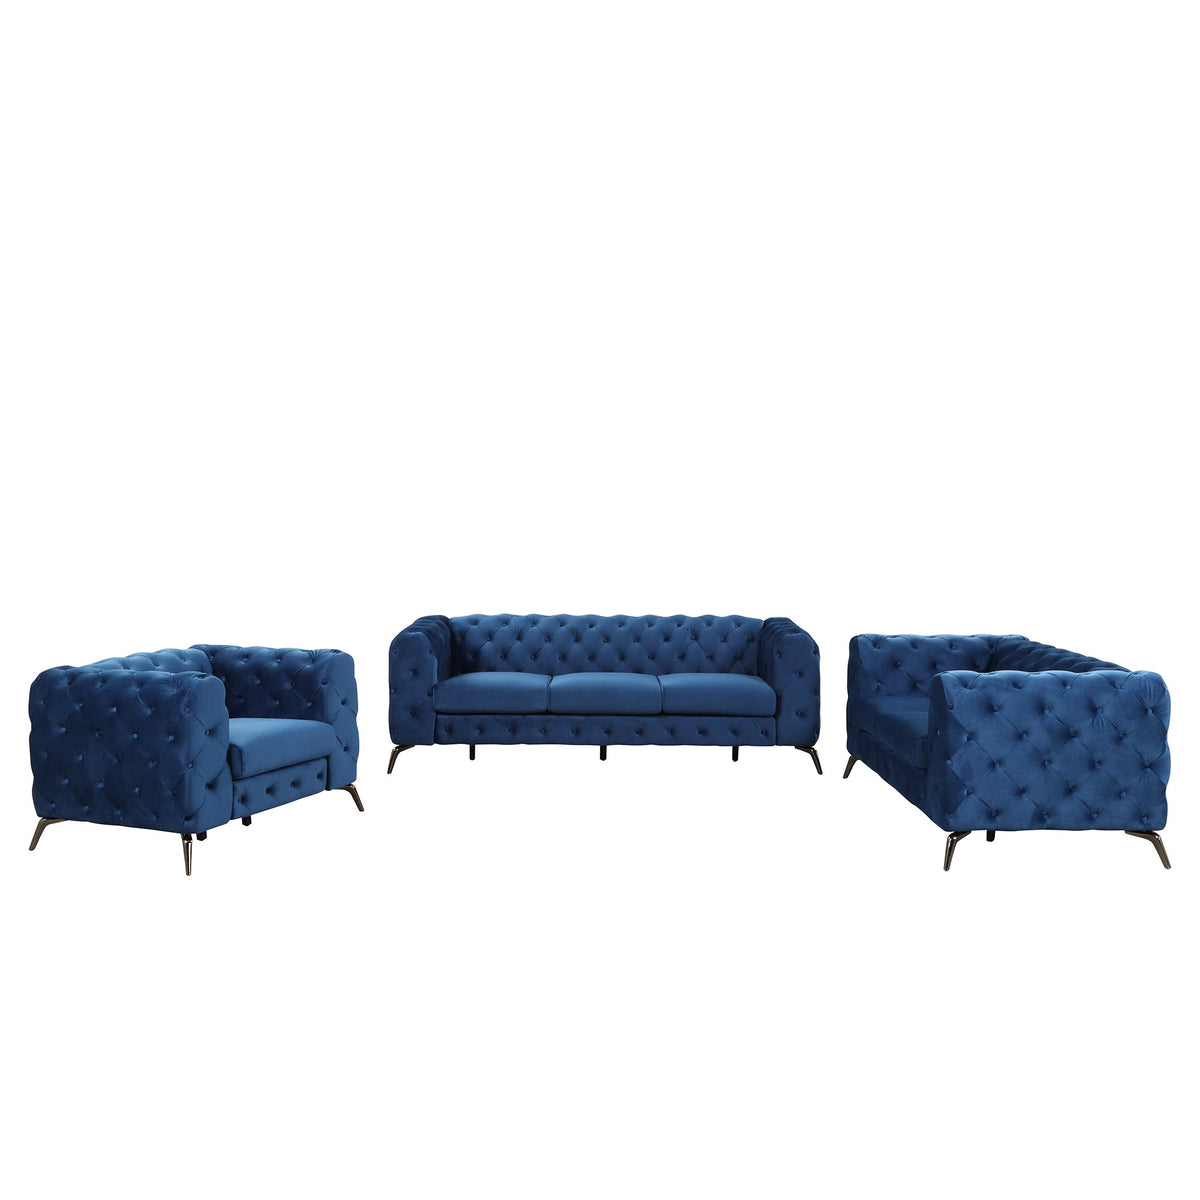 Modern 3-Piece Sofa Sets with Sturdy Metal Legs,Velvet Upholstered